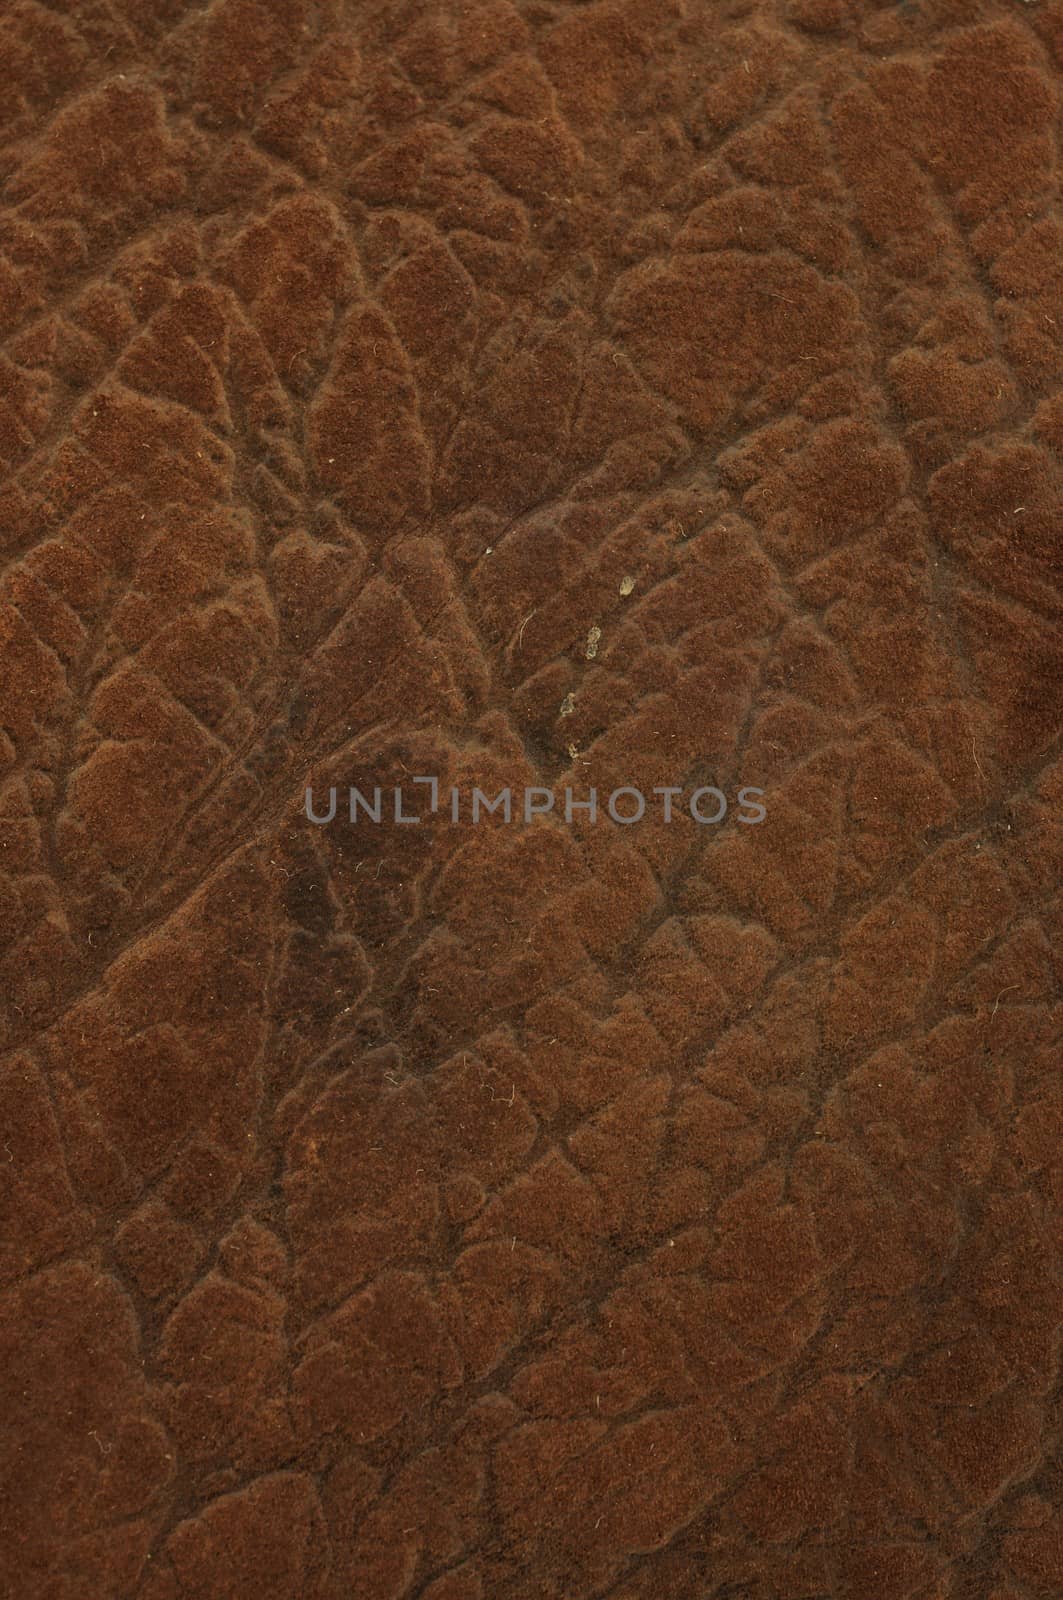 Elephant Leather texture background for use as web element or background